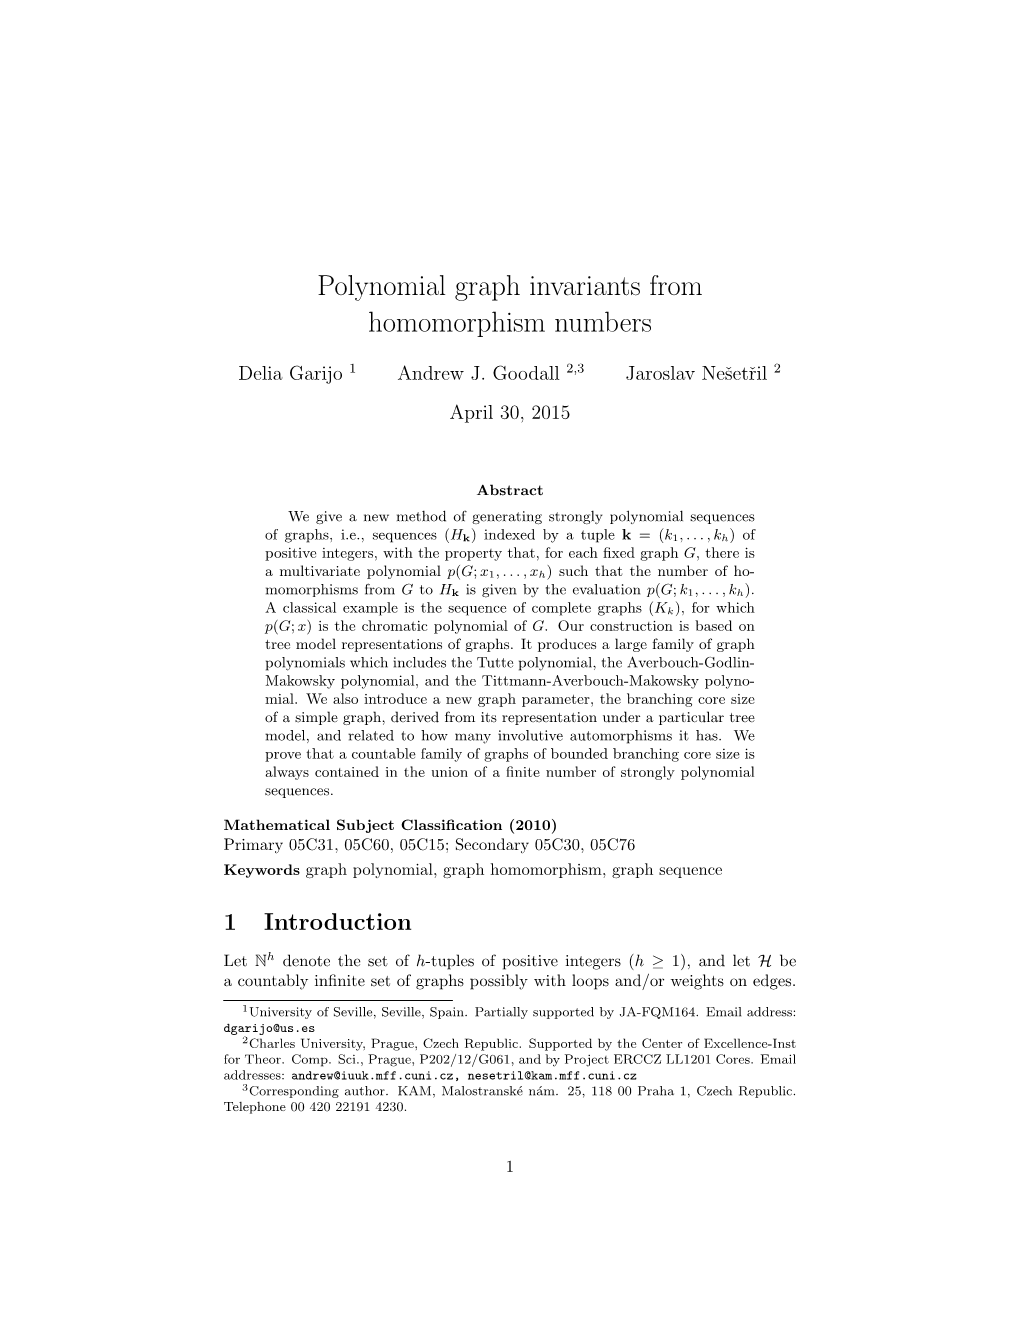 Polynomial Graph Invariants from Homomorphism Numbers